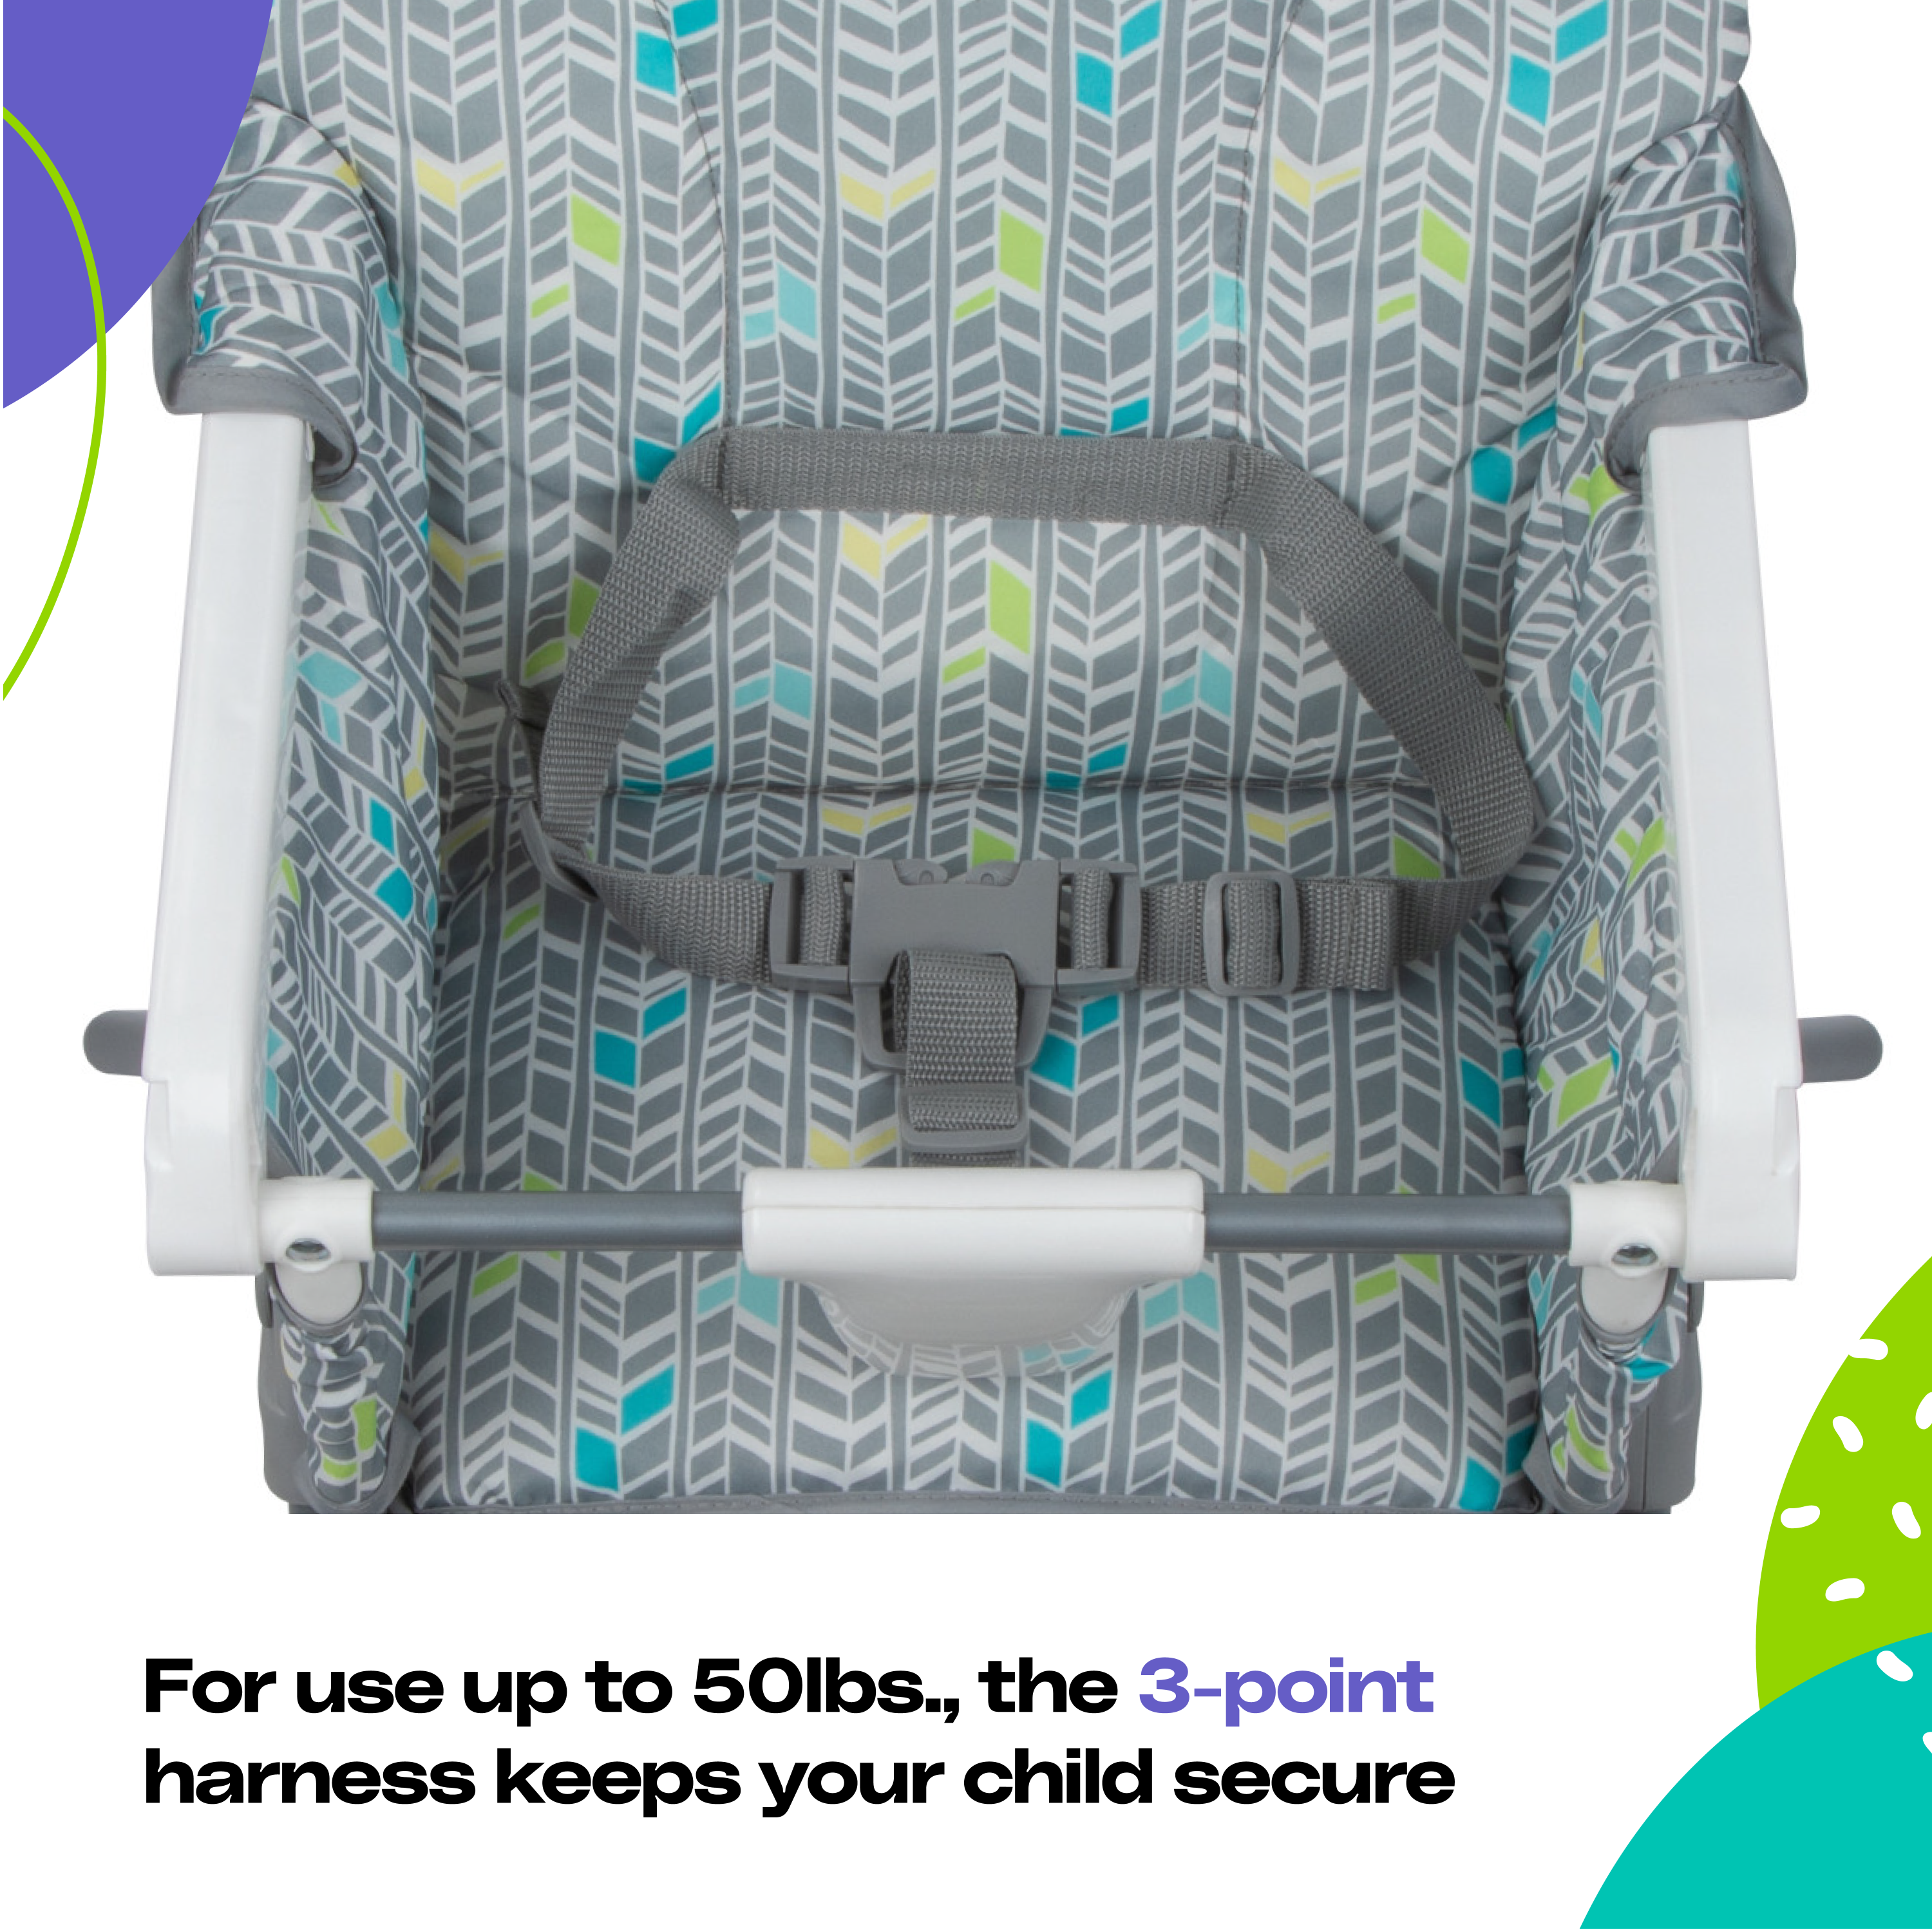 Simple Fold™ Full Size High Chair with Adjustable Tray - for use up to 50 lbs., the 3-point harness keps your child secure